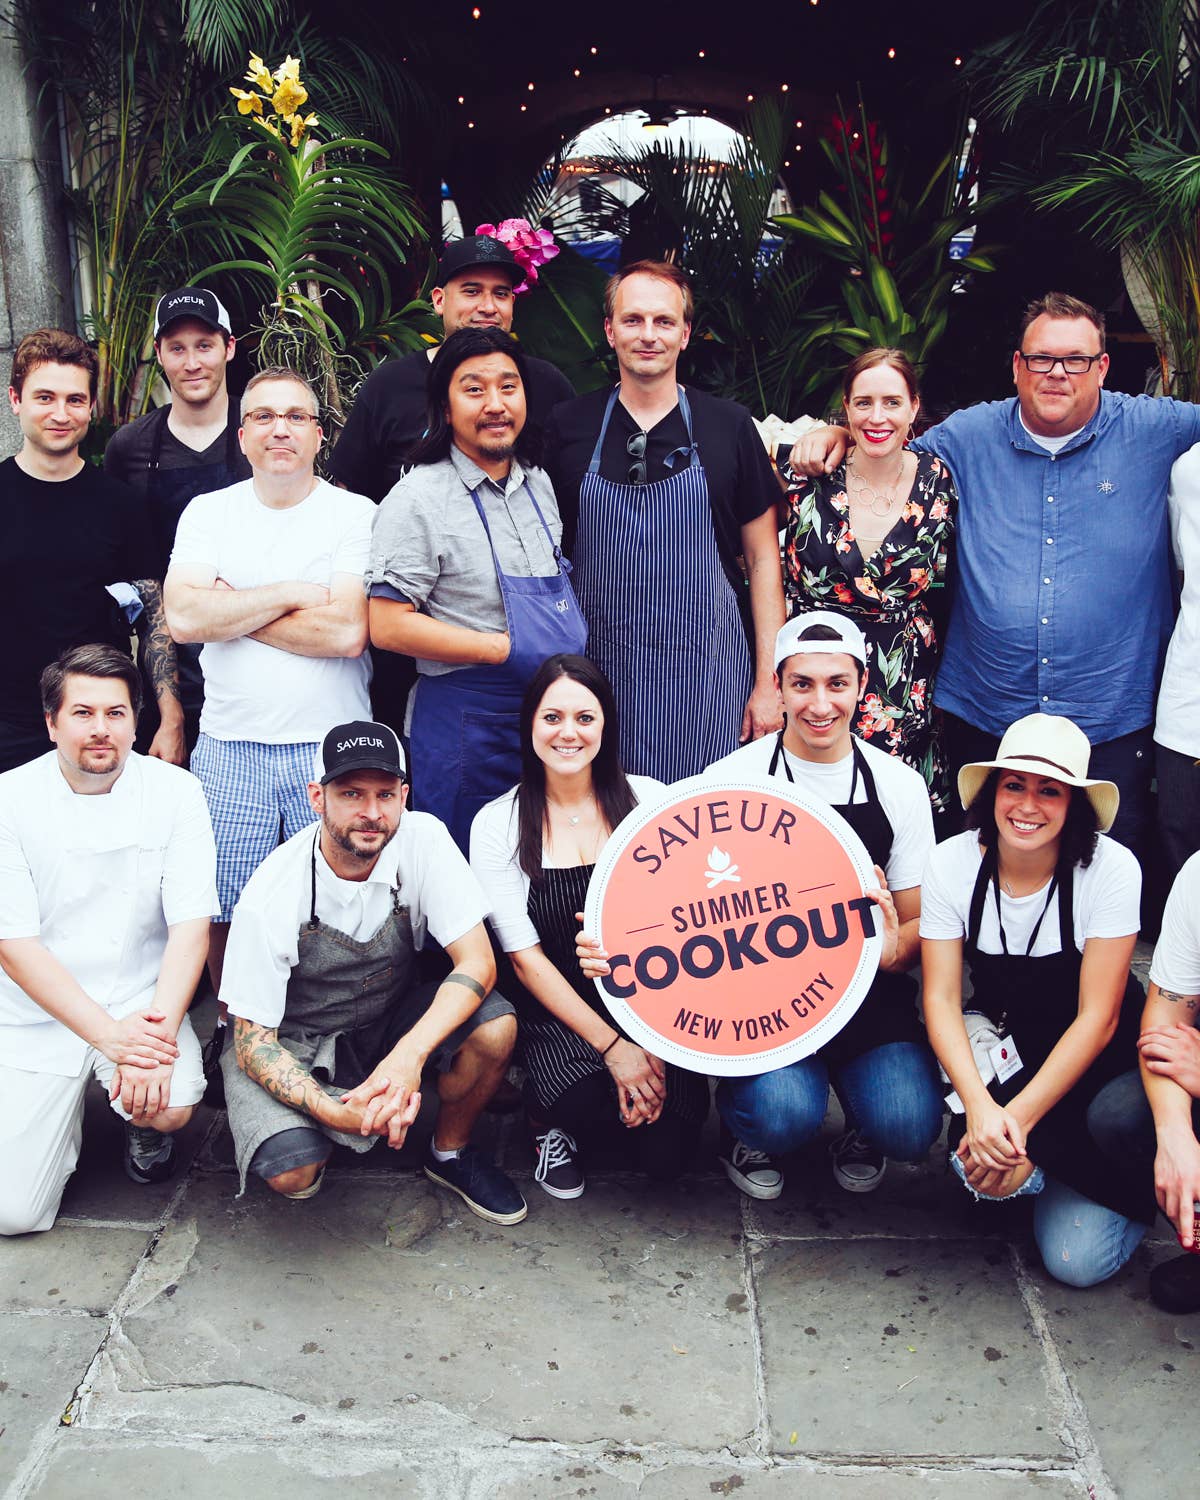 Scenes from the 6th Annual SAVEUR Summer Cookout